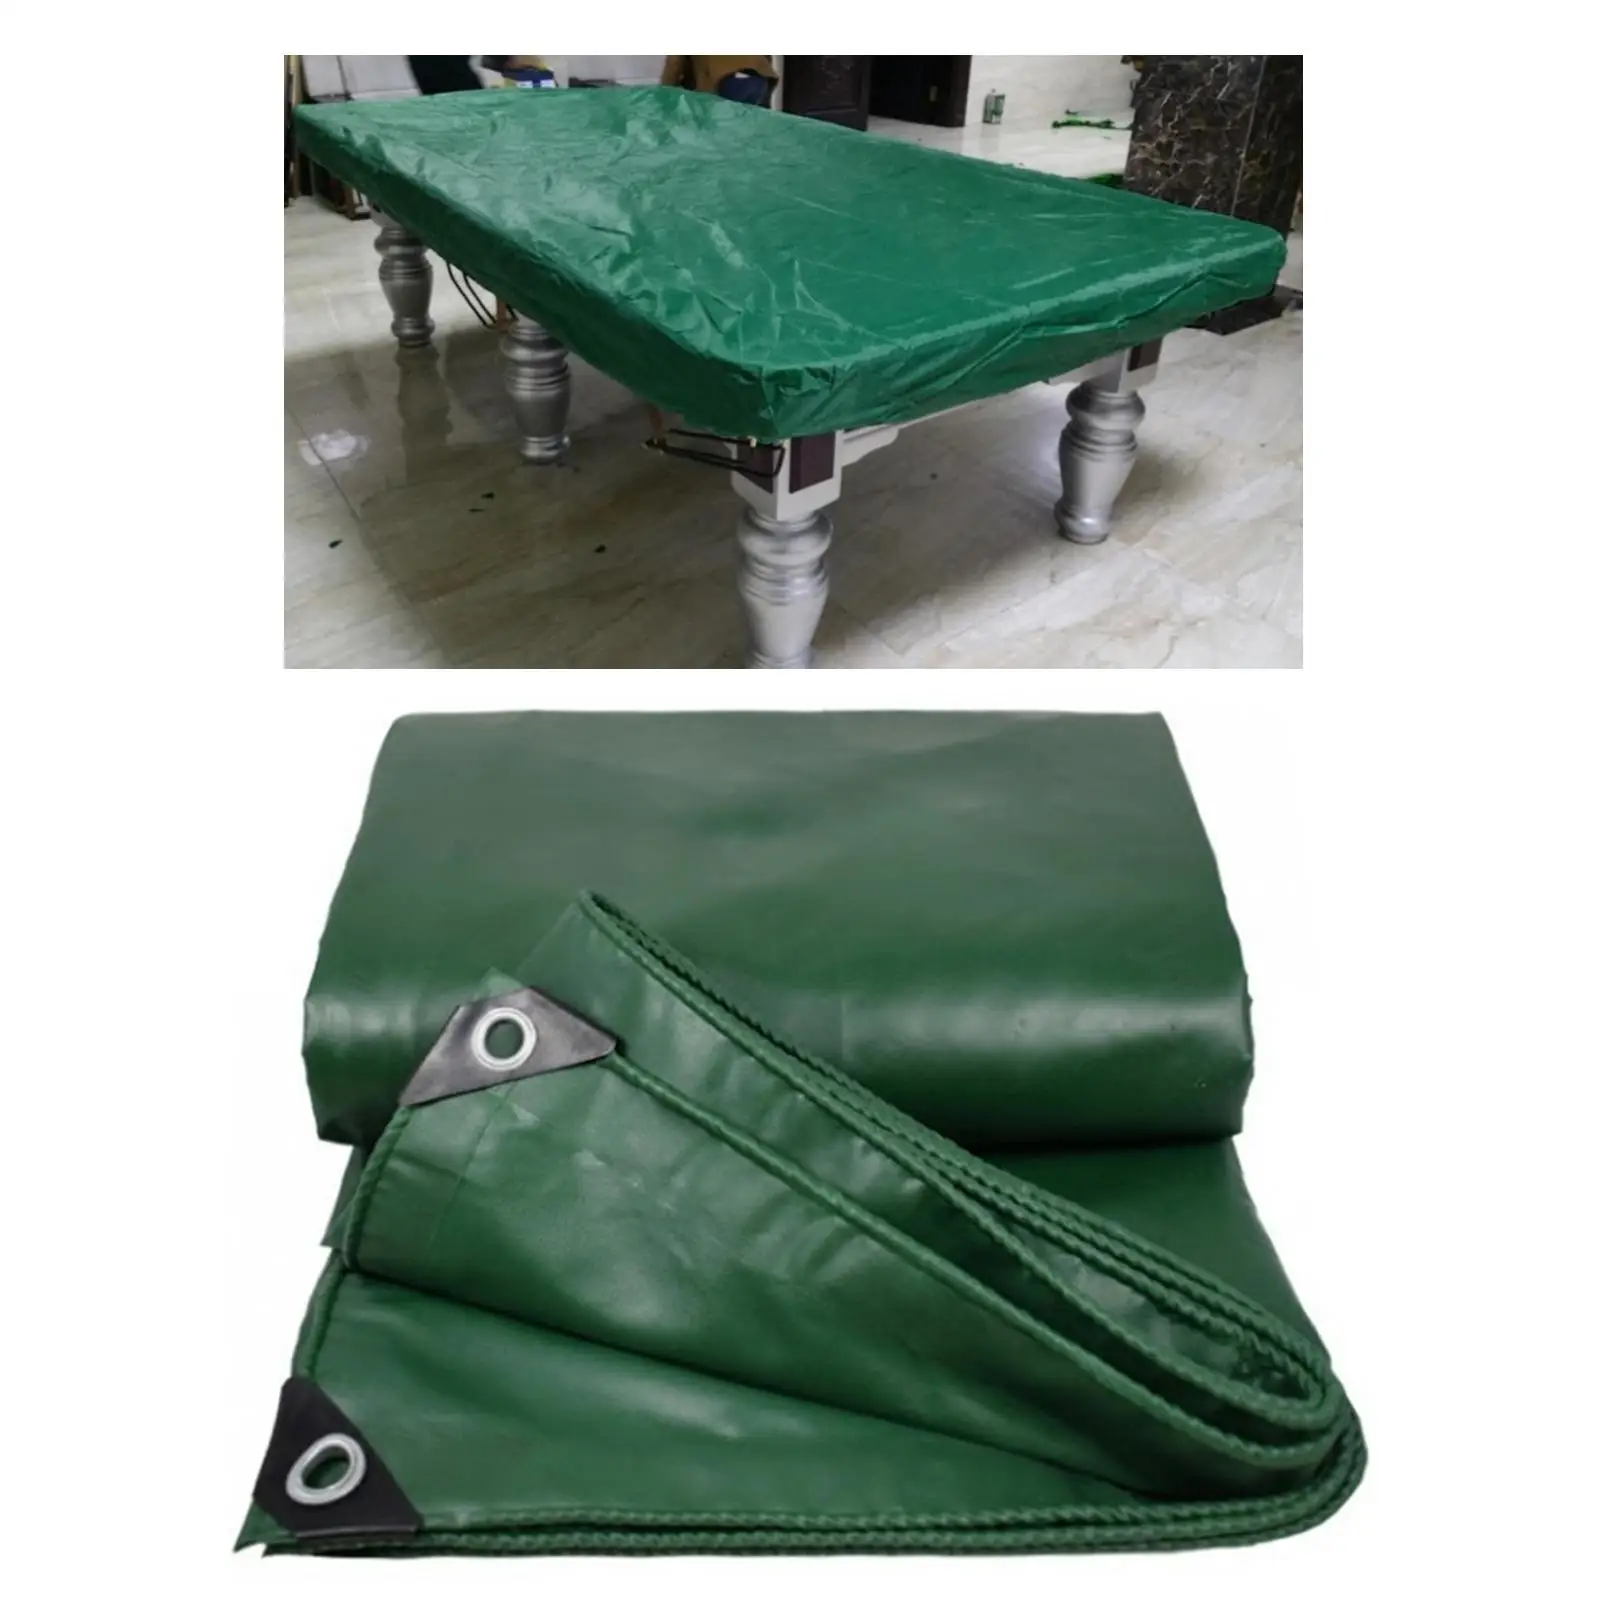 Billiard Snooker Table Cover 9ft Dustproof Waterproof Anti UV Easy to Clean with Drawstring Pool Table Cover for Vehicles Trains